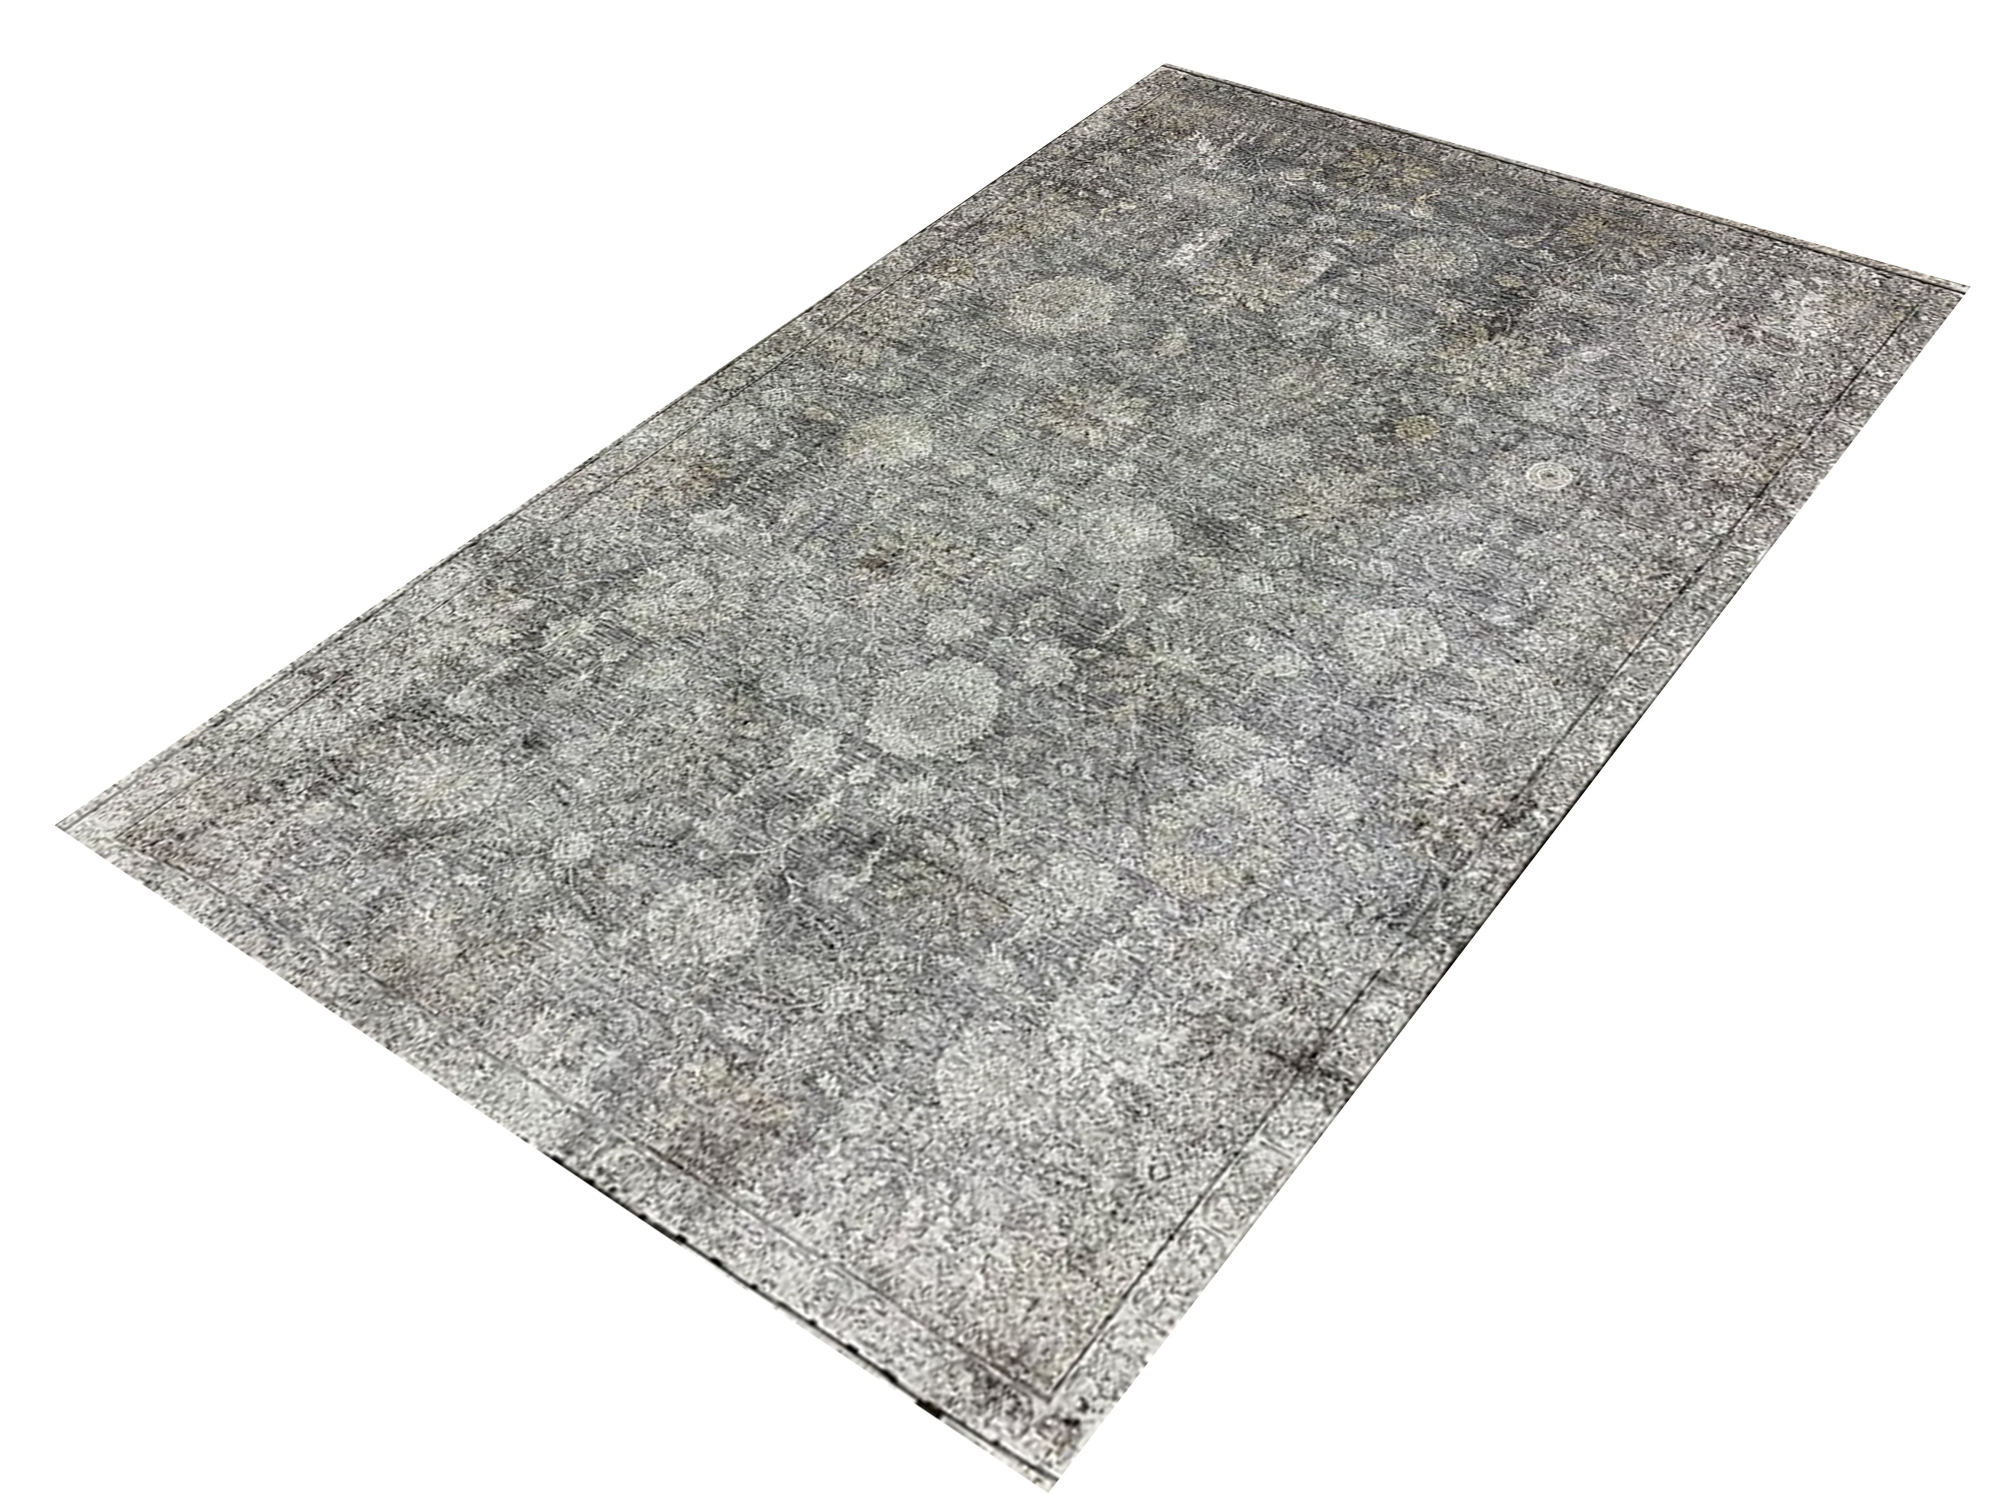 Soho Grey/Brown Woven Rug-Area rug for living room, dining area, and bedroom